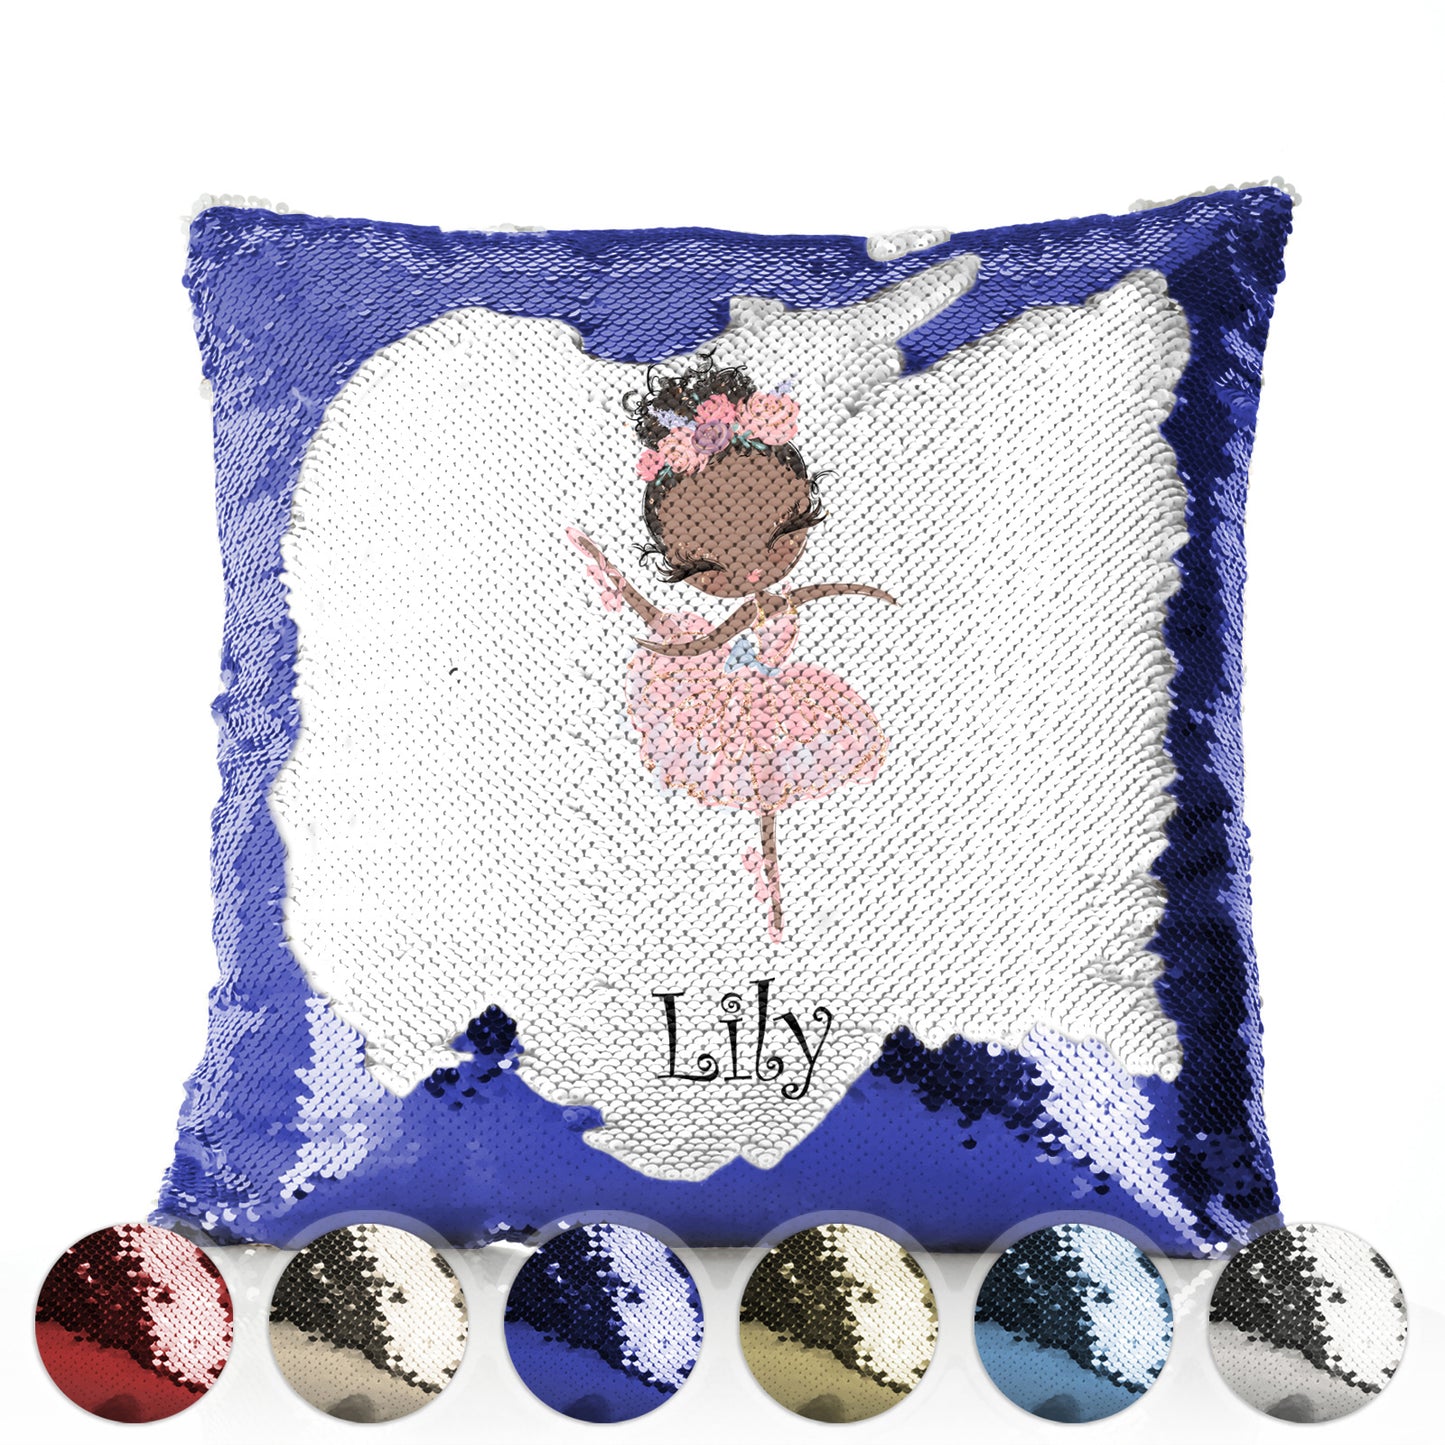 Personalised Sequin Cushion with Cute Text and Black Hair Pink Dress Ballerina